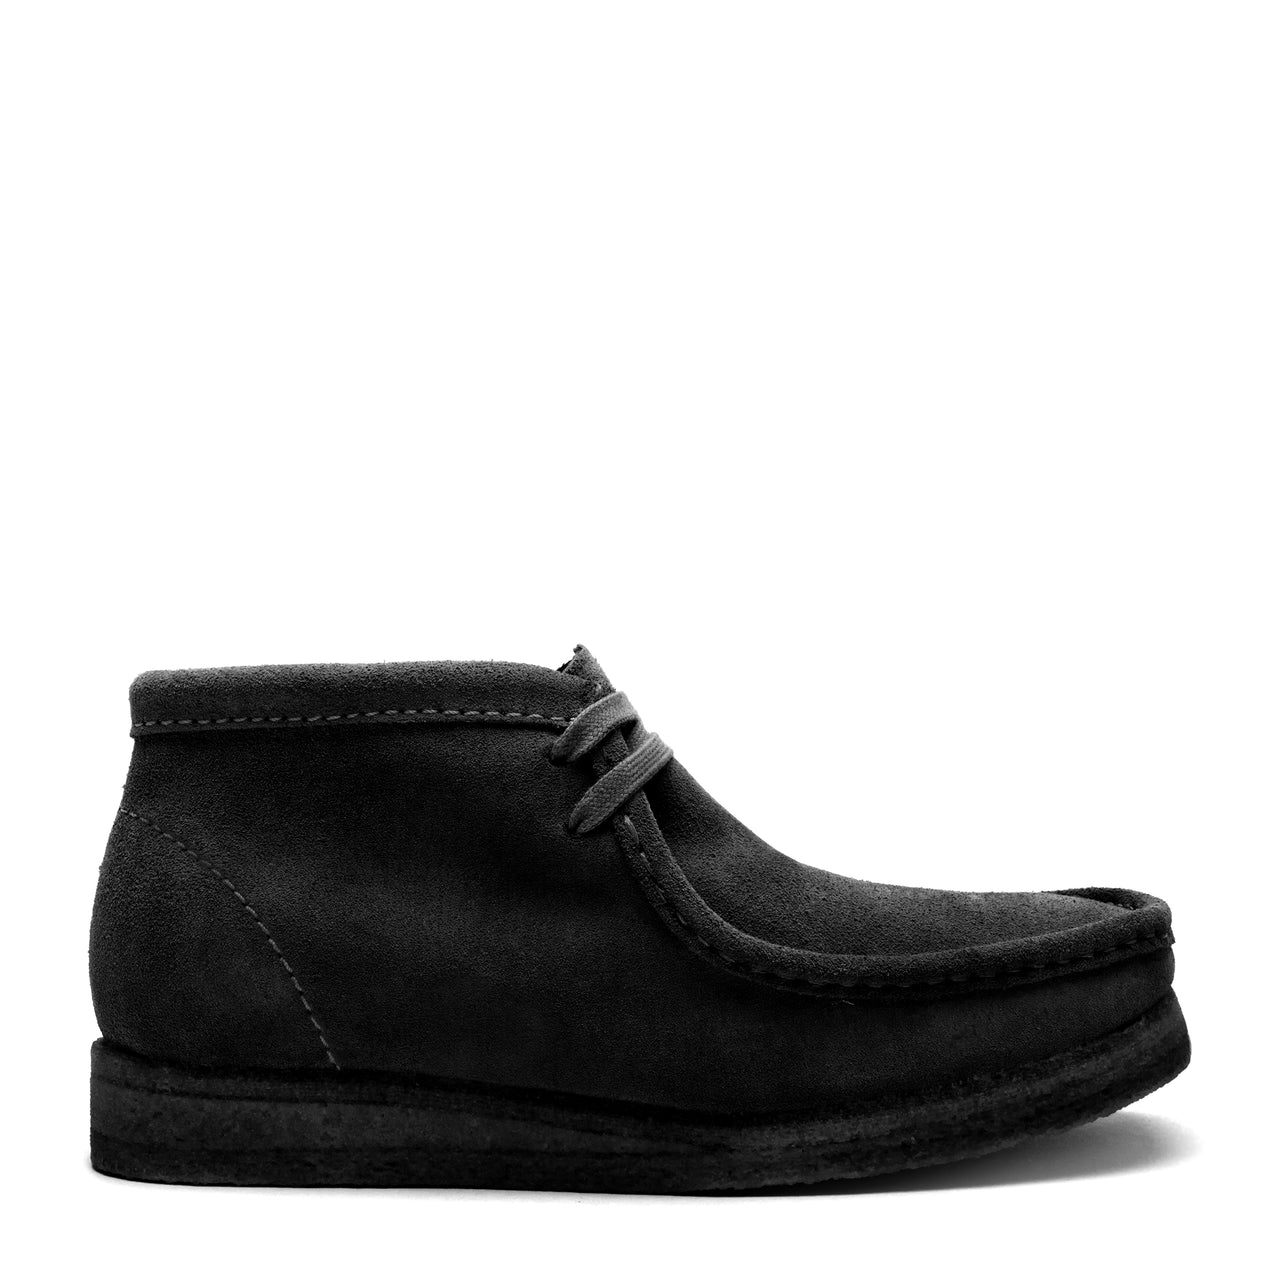 WMNS WALLABEE BOOT